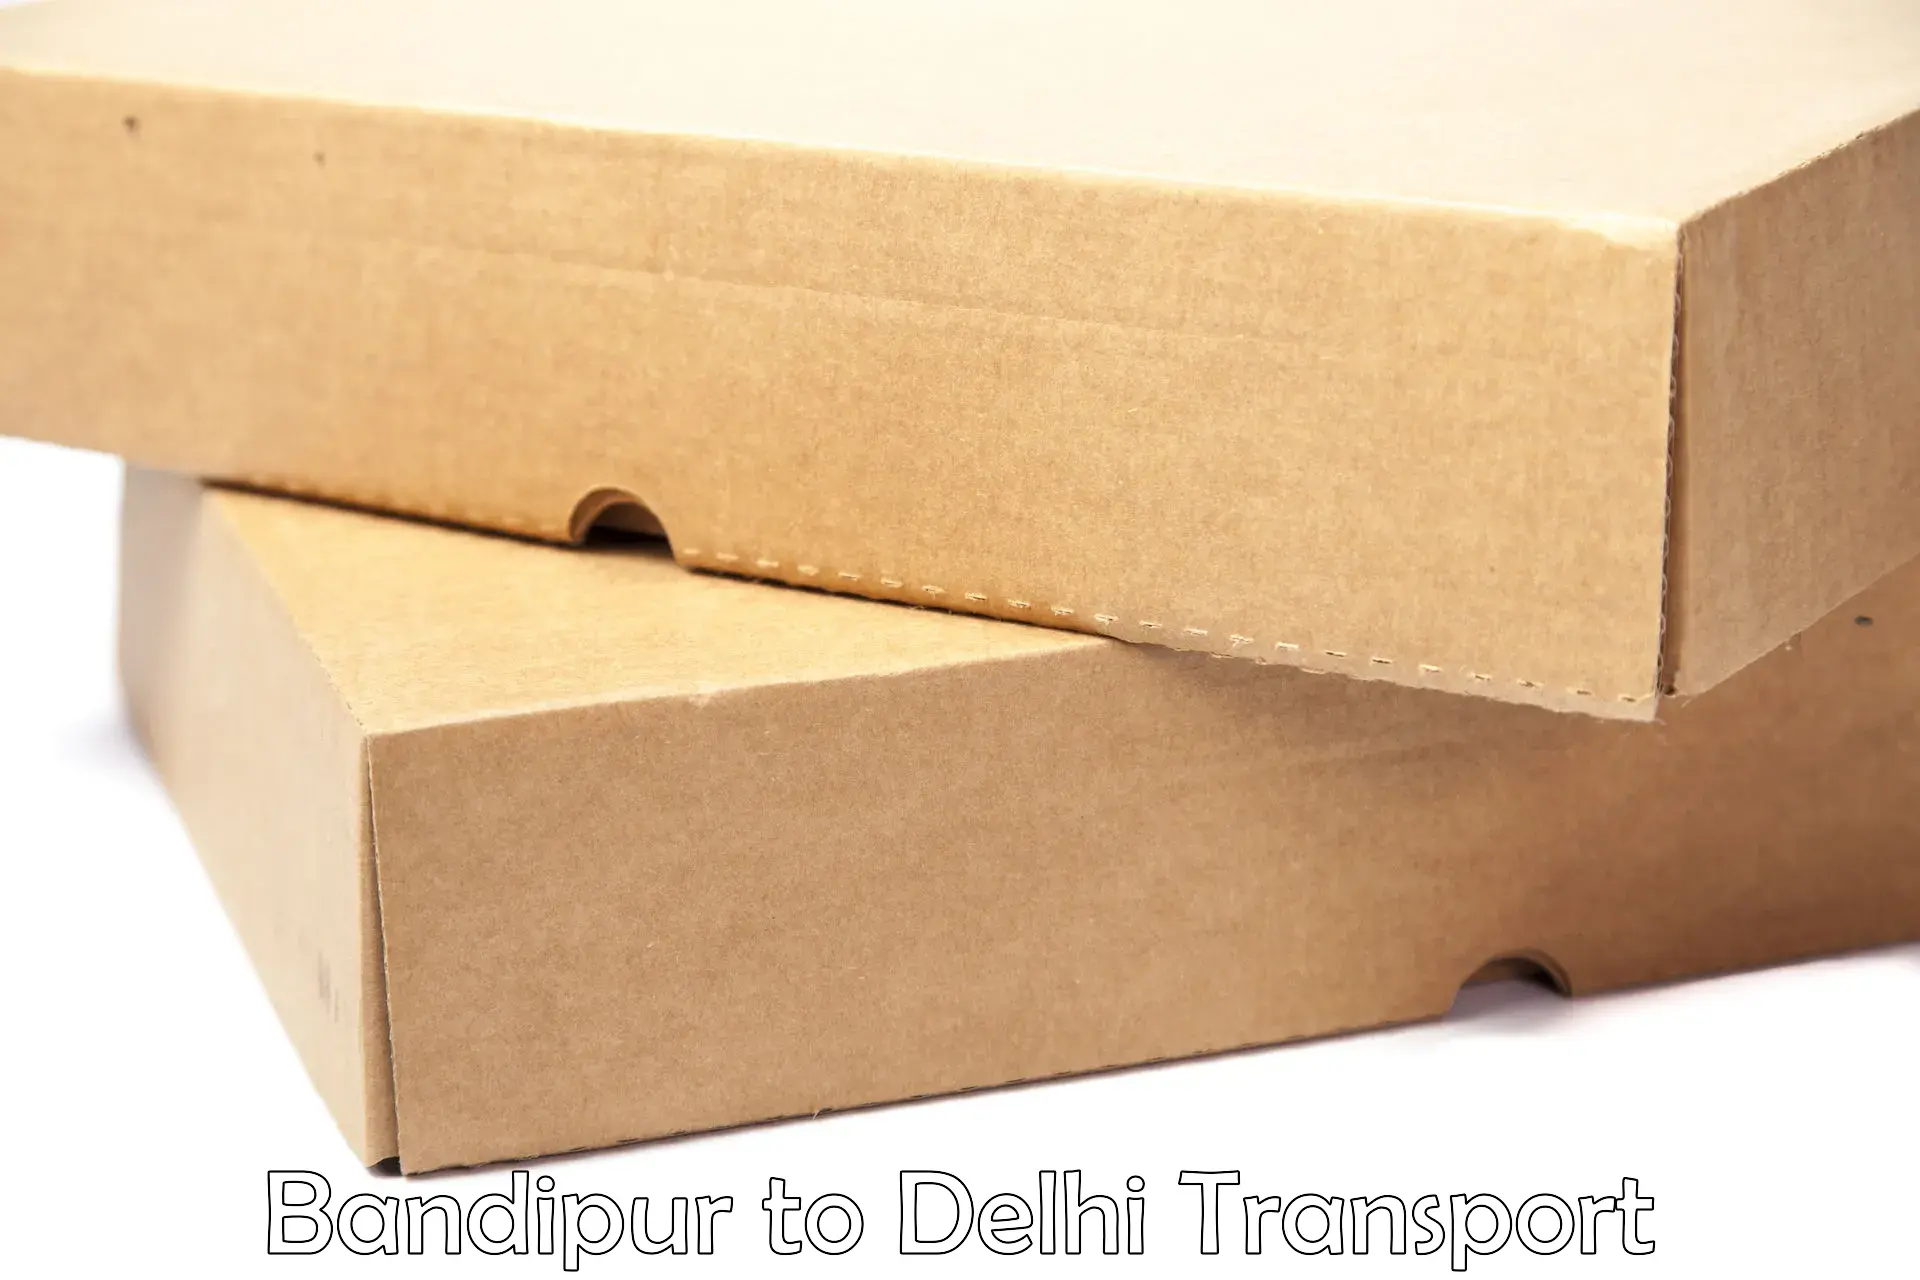 Cycle transportation service in Bandipur to Delhi